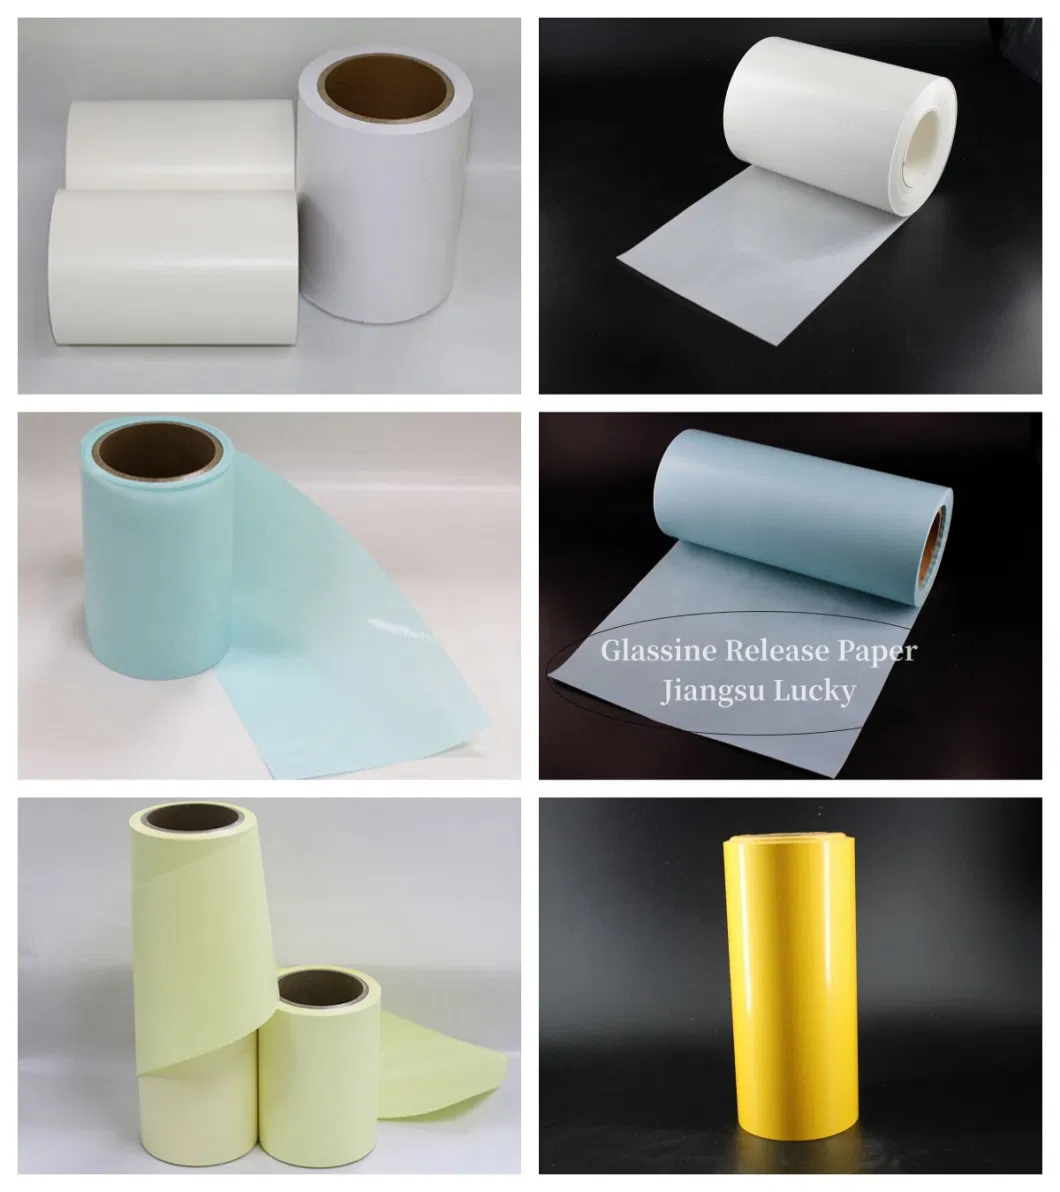 Thermal Paper Eco Top with Glassine Label Material for Printing